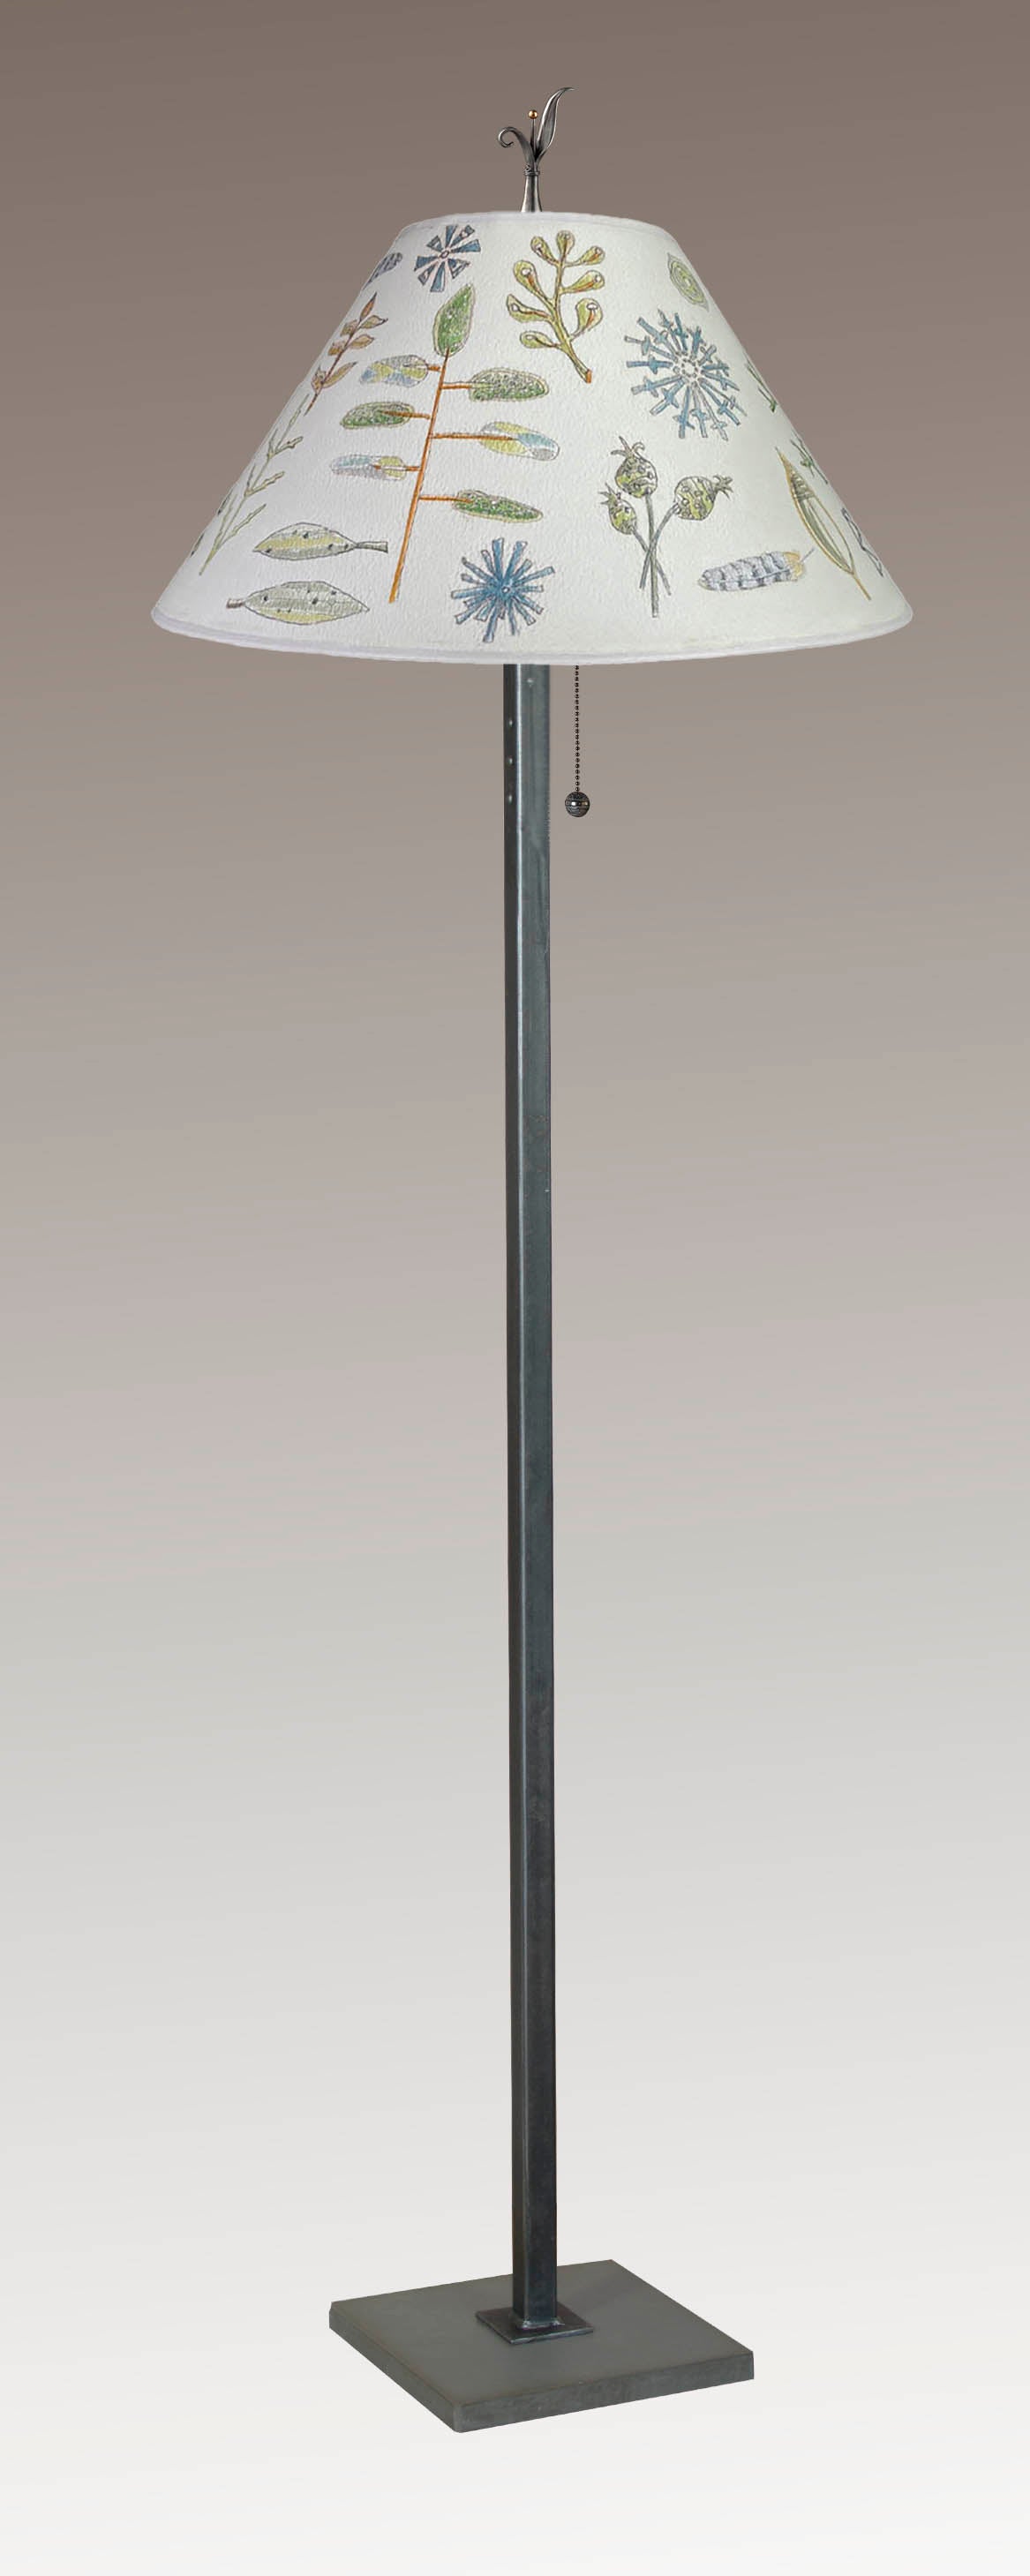 Janna Ugone &amp; Co Floor Lamp Steel Floor Lamp with Large Conical Shade in Field Chart